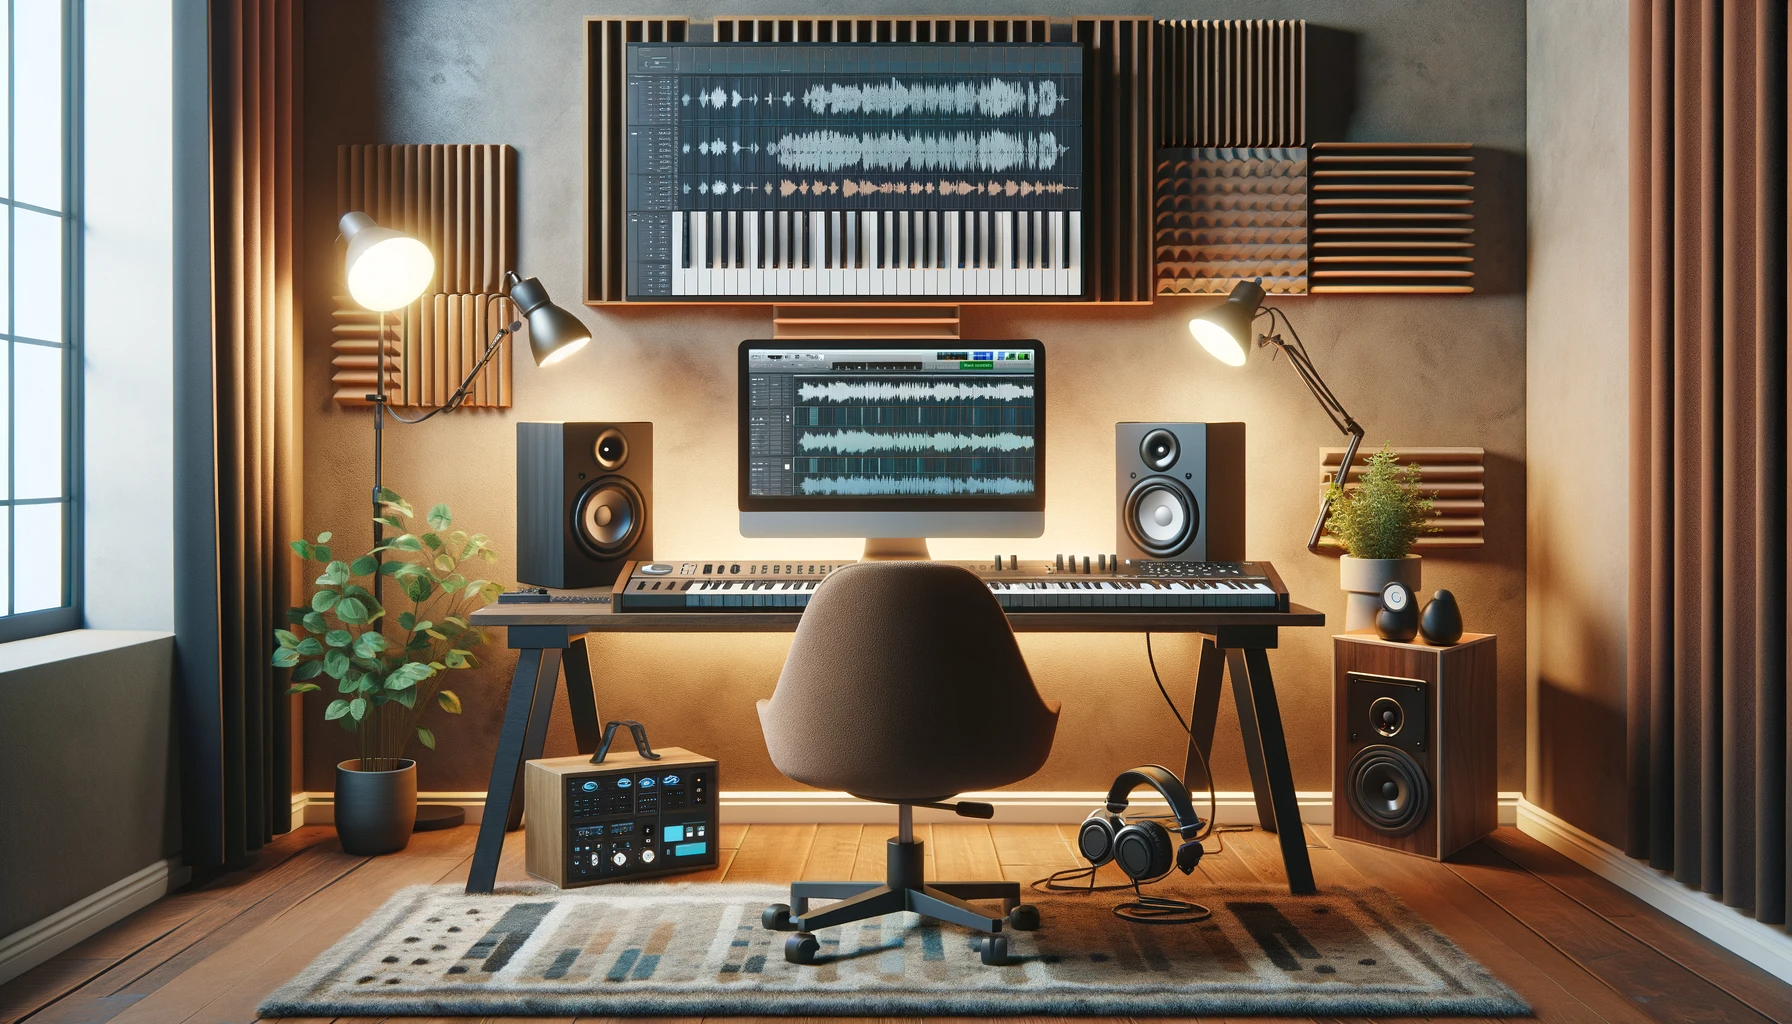 Mastering Best Practices for Independent Artists